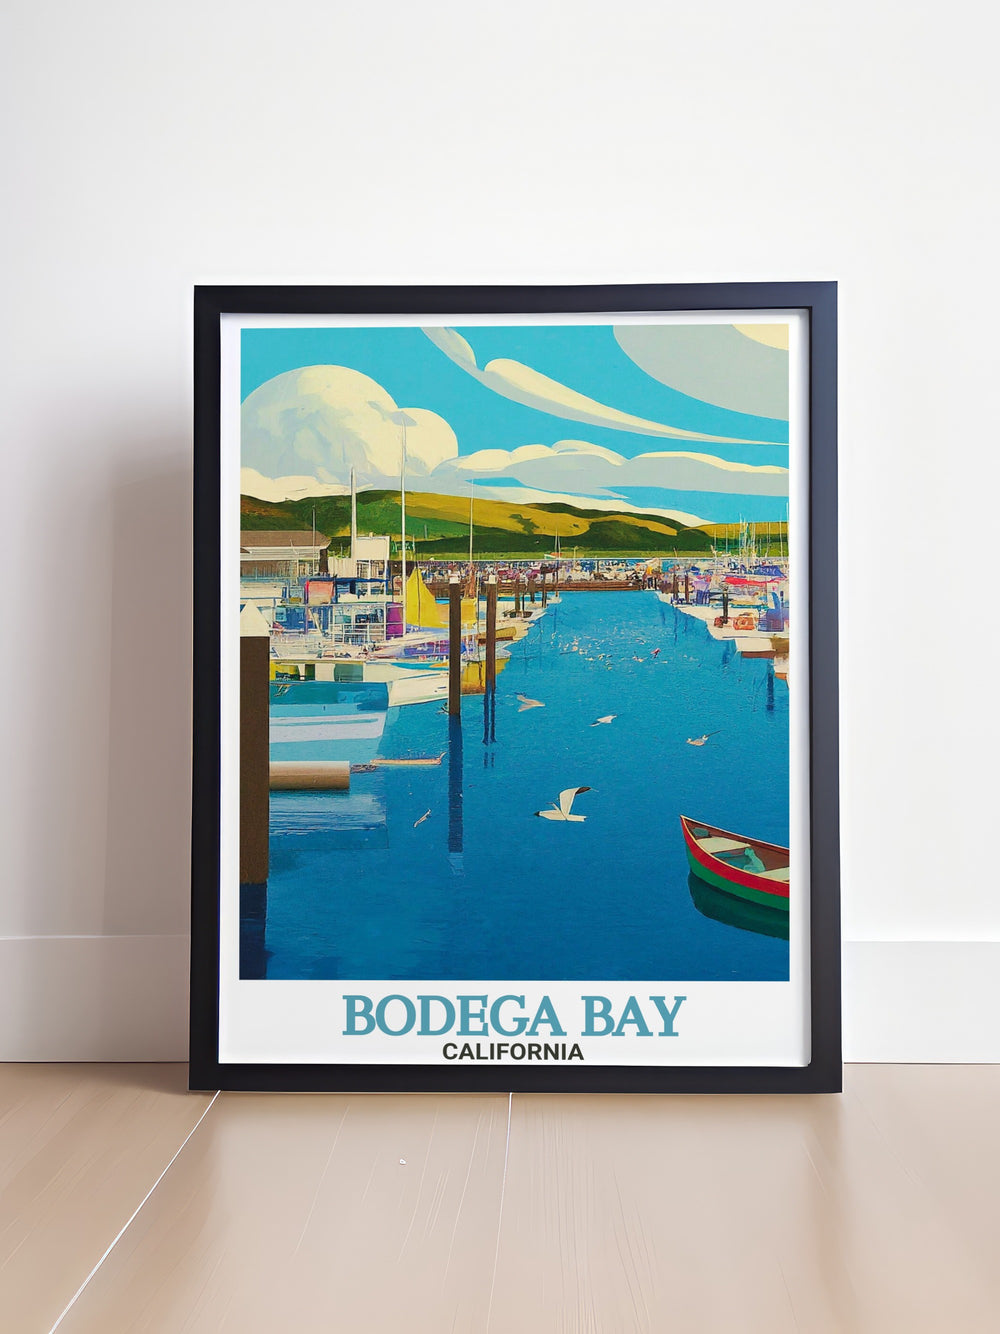 Bodega Bay art print featuring a stunning view of the Bodega Bay Marina. Ideal for adding a touch of coastal California to your living space or office. Great for lovers of California travel and beach destinations.